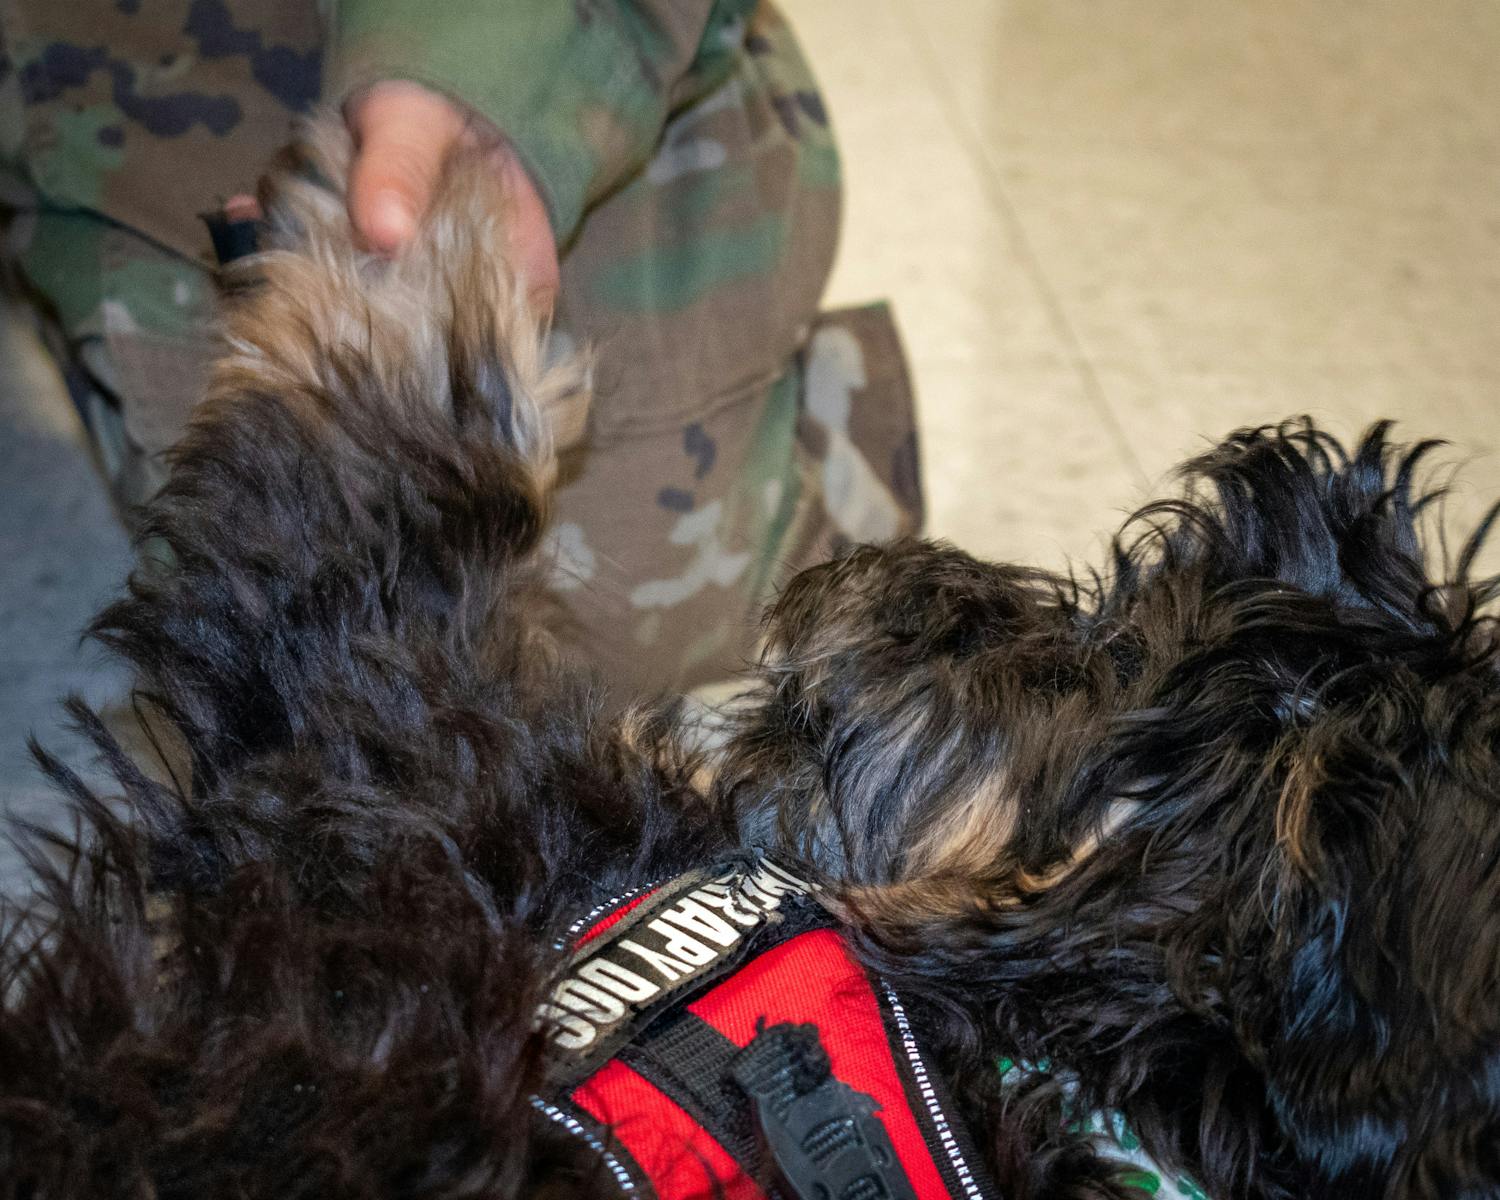 Finn shakes paws with a visitor of the Veteran Services lounge.